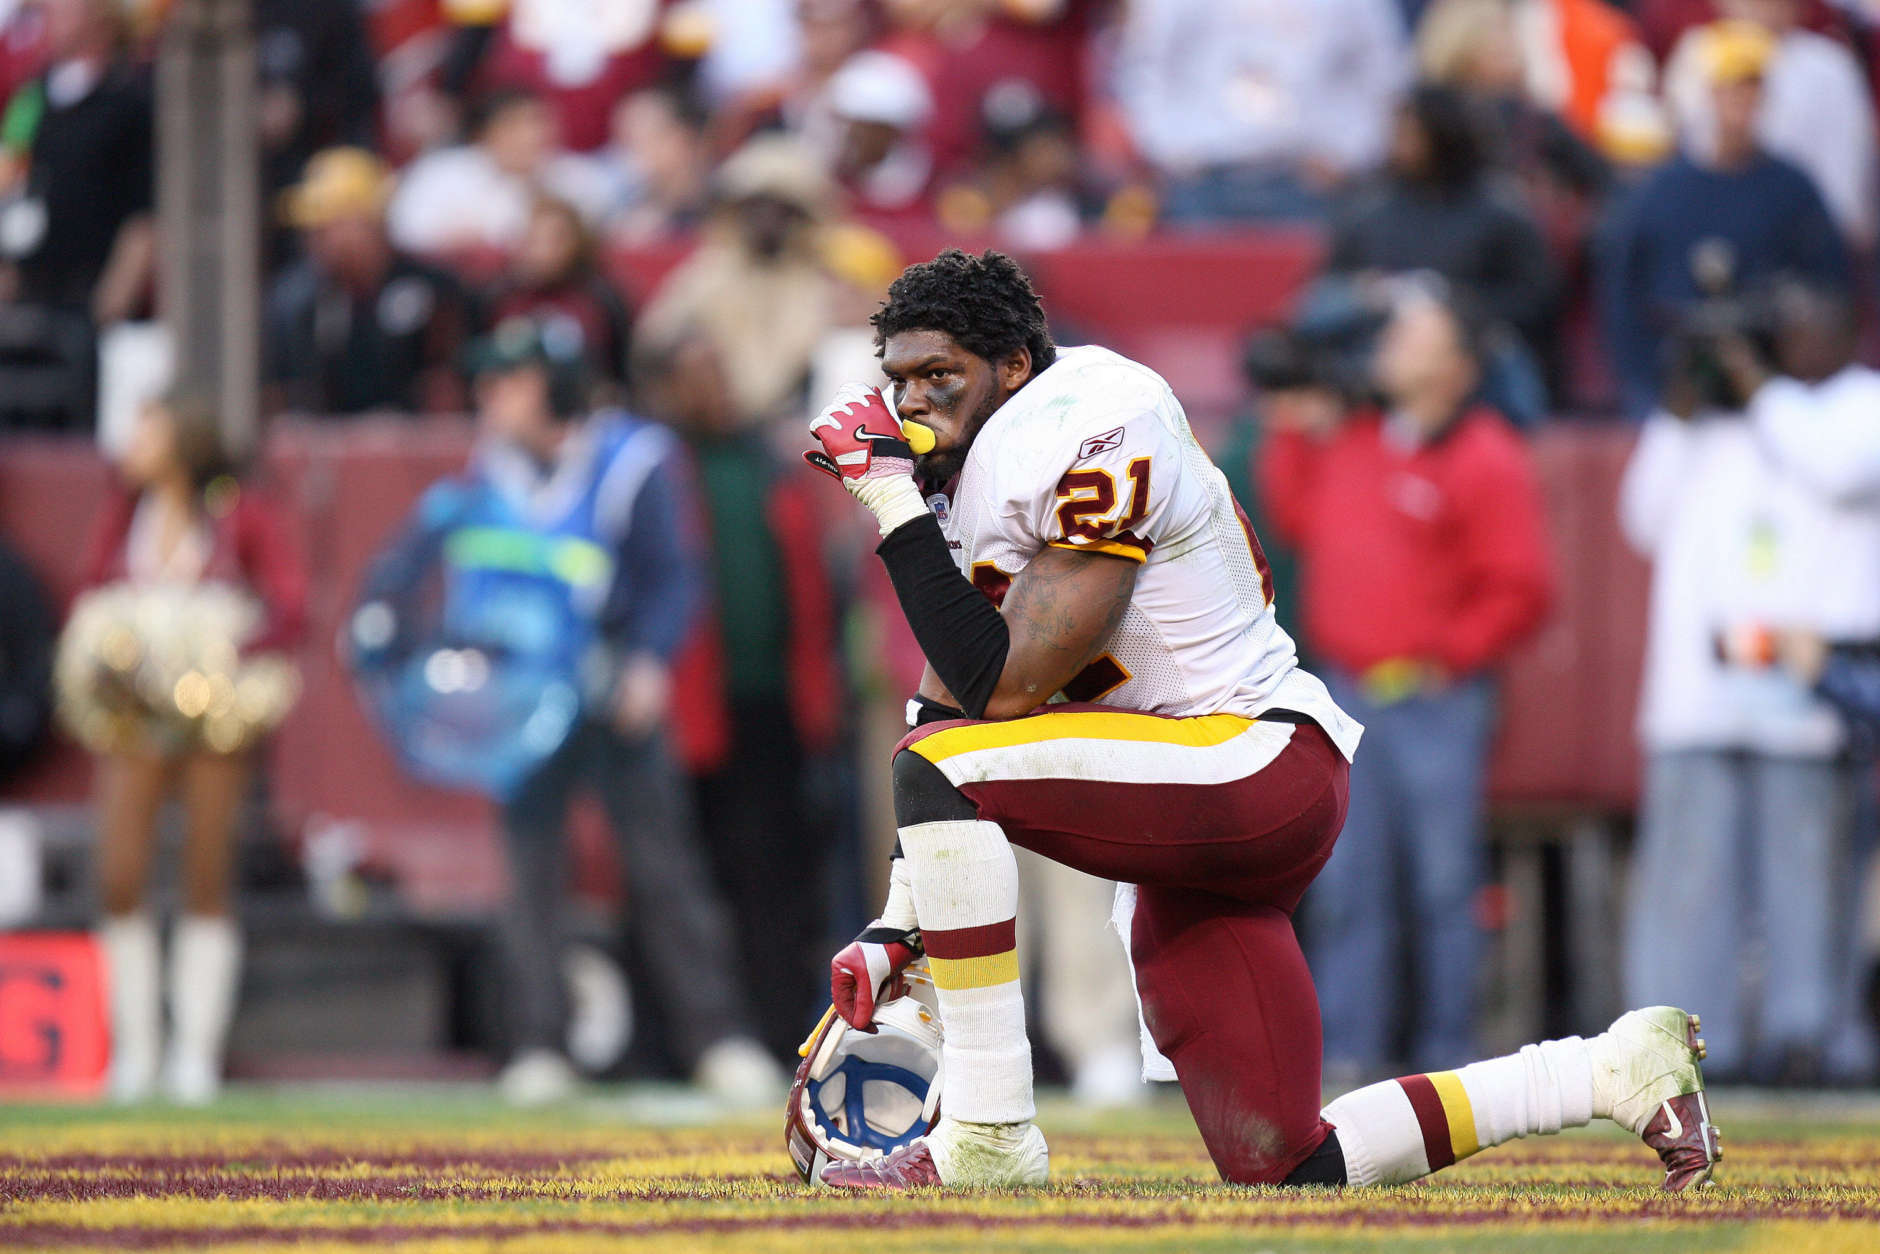 Washington Redskins defensive back Sean Taylor (21) looks on against Oakland during the second half at FedEx Field in Landover, Maryland on November 20, 2005. Oakland defeated Washington 16-13. (Photo by Allen Kee/Getty Images)